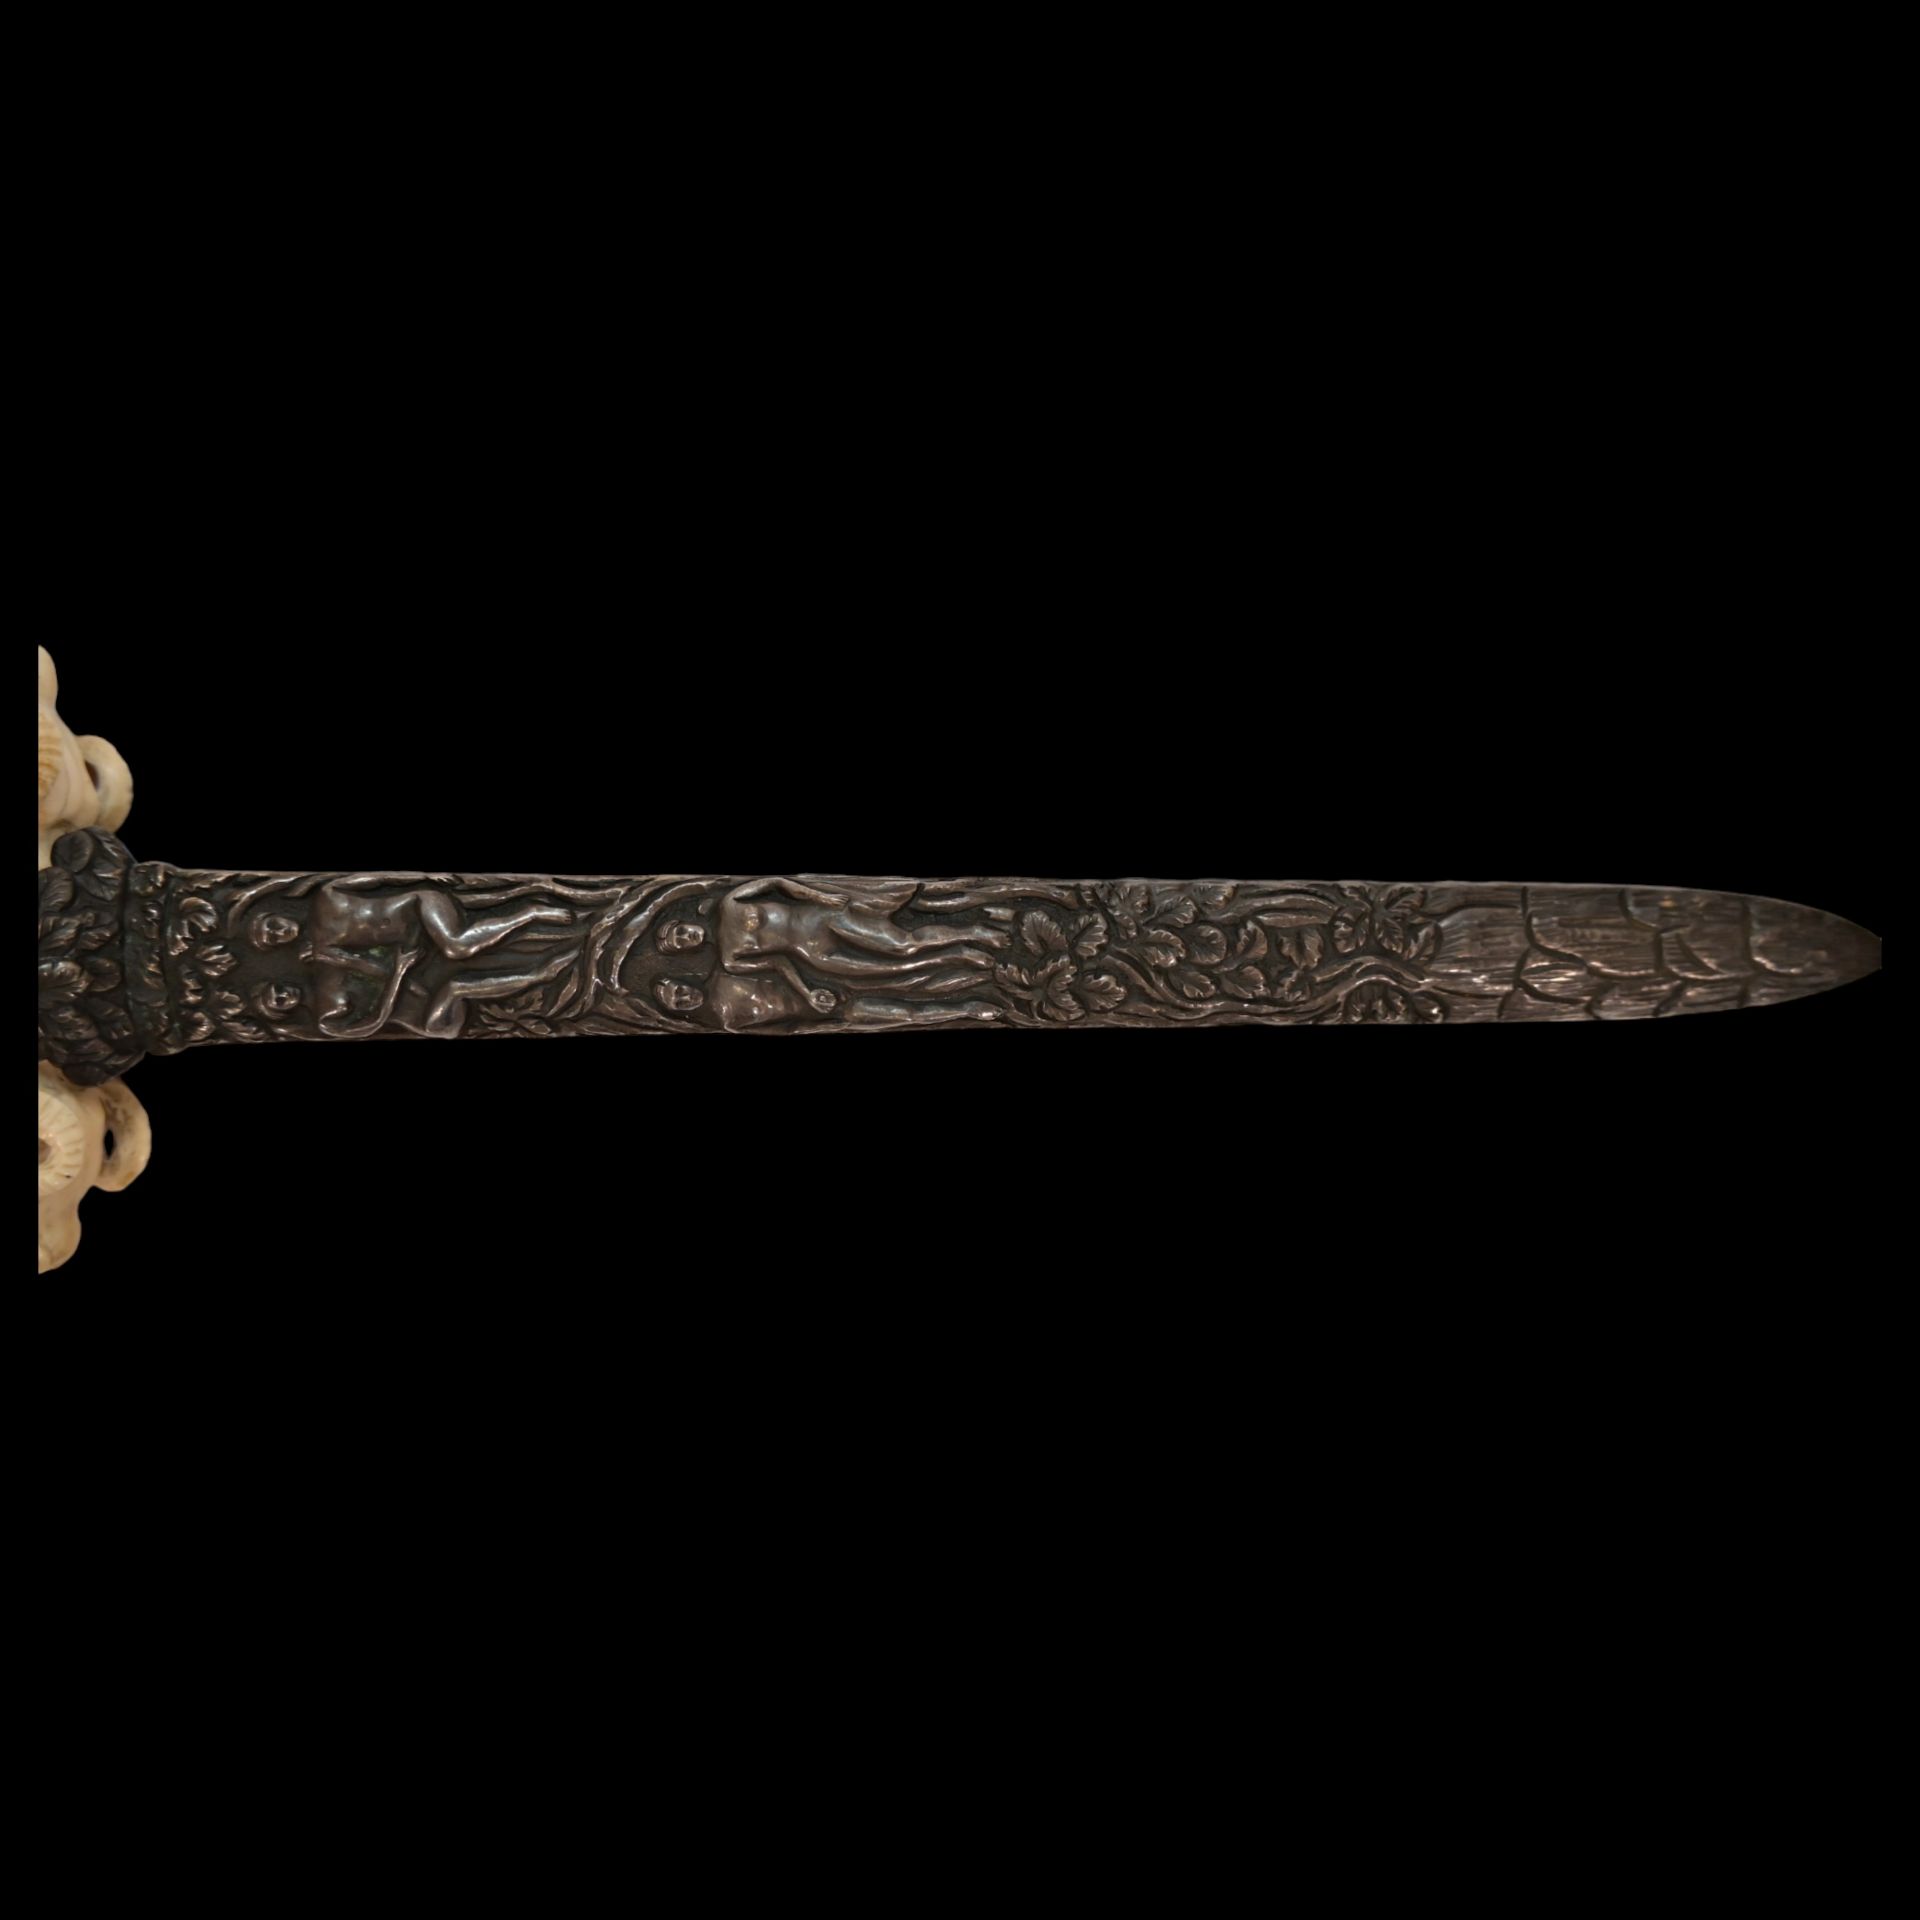 A fine French dagger with carved bone hilt and silver scabbard with erotic scenes, 19th century. - Image 6 of 14